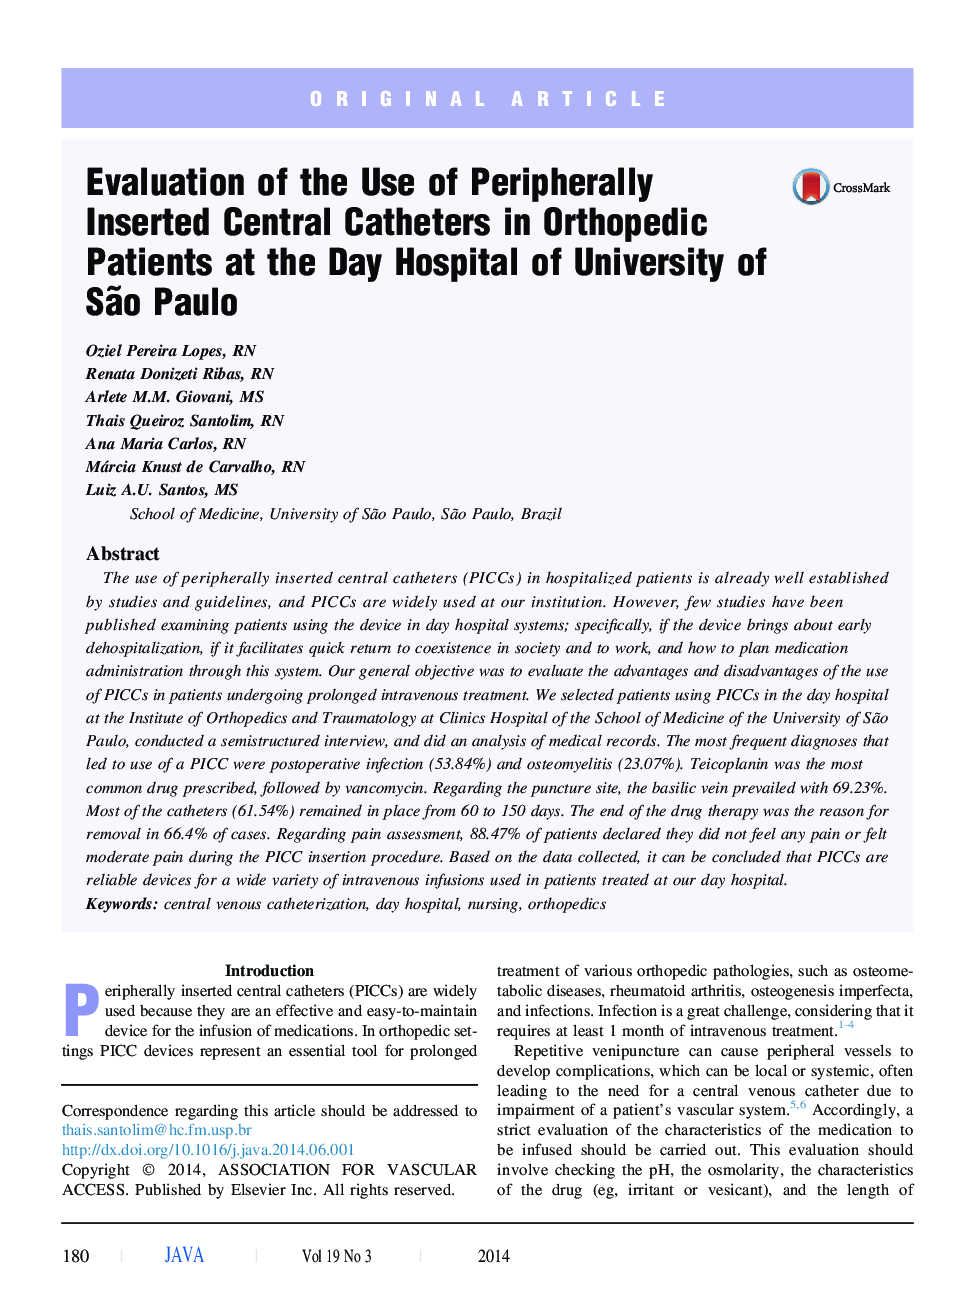 Evaluation of the Use of Peripherally Inserted Central Catheters in Orthopedic Patients at the Day Hospital of University of São Paulo